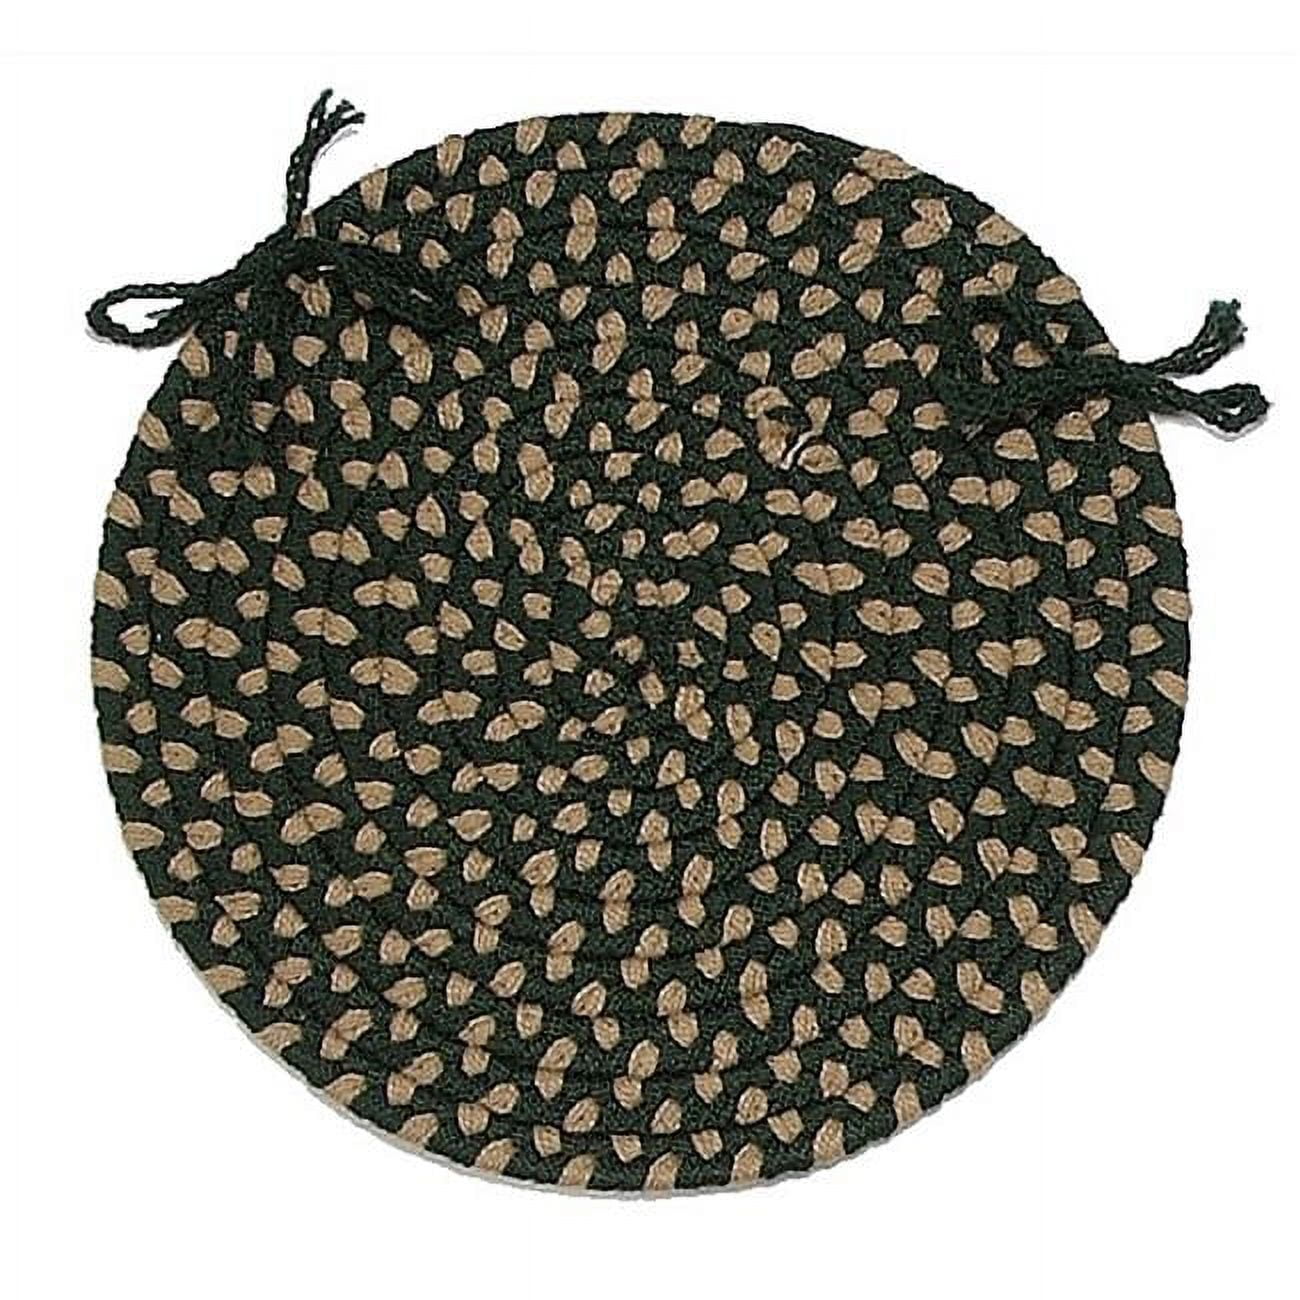 Bf62r084x084 7 Ft. Brook Farm Round Area Rug, Winter Green